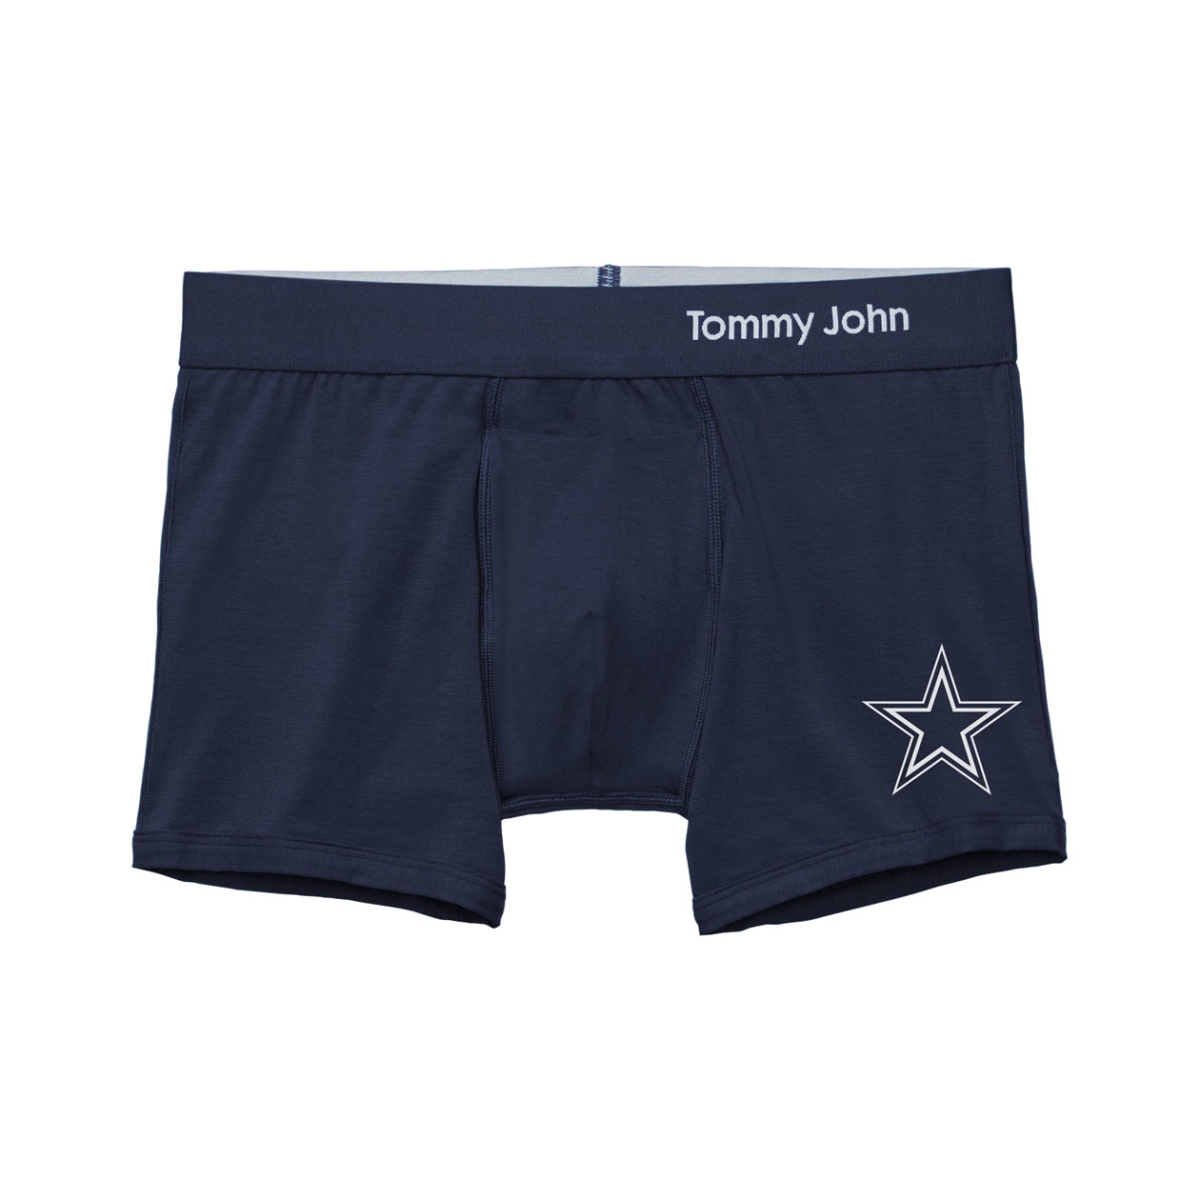 Tommy John Underwear to Now Feature The Dallas Cowboys Star